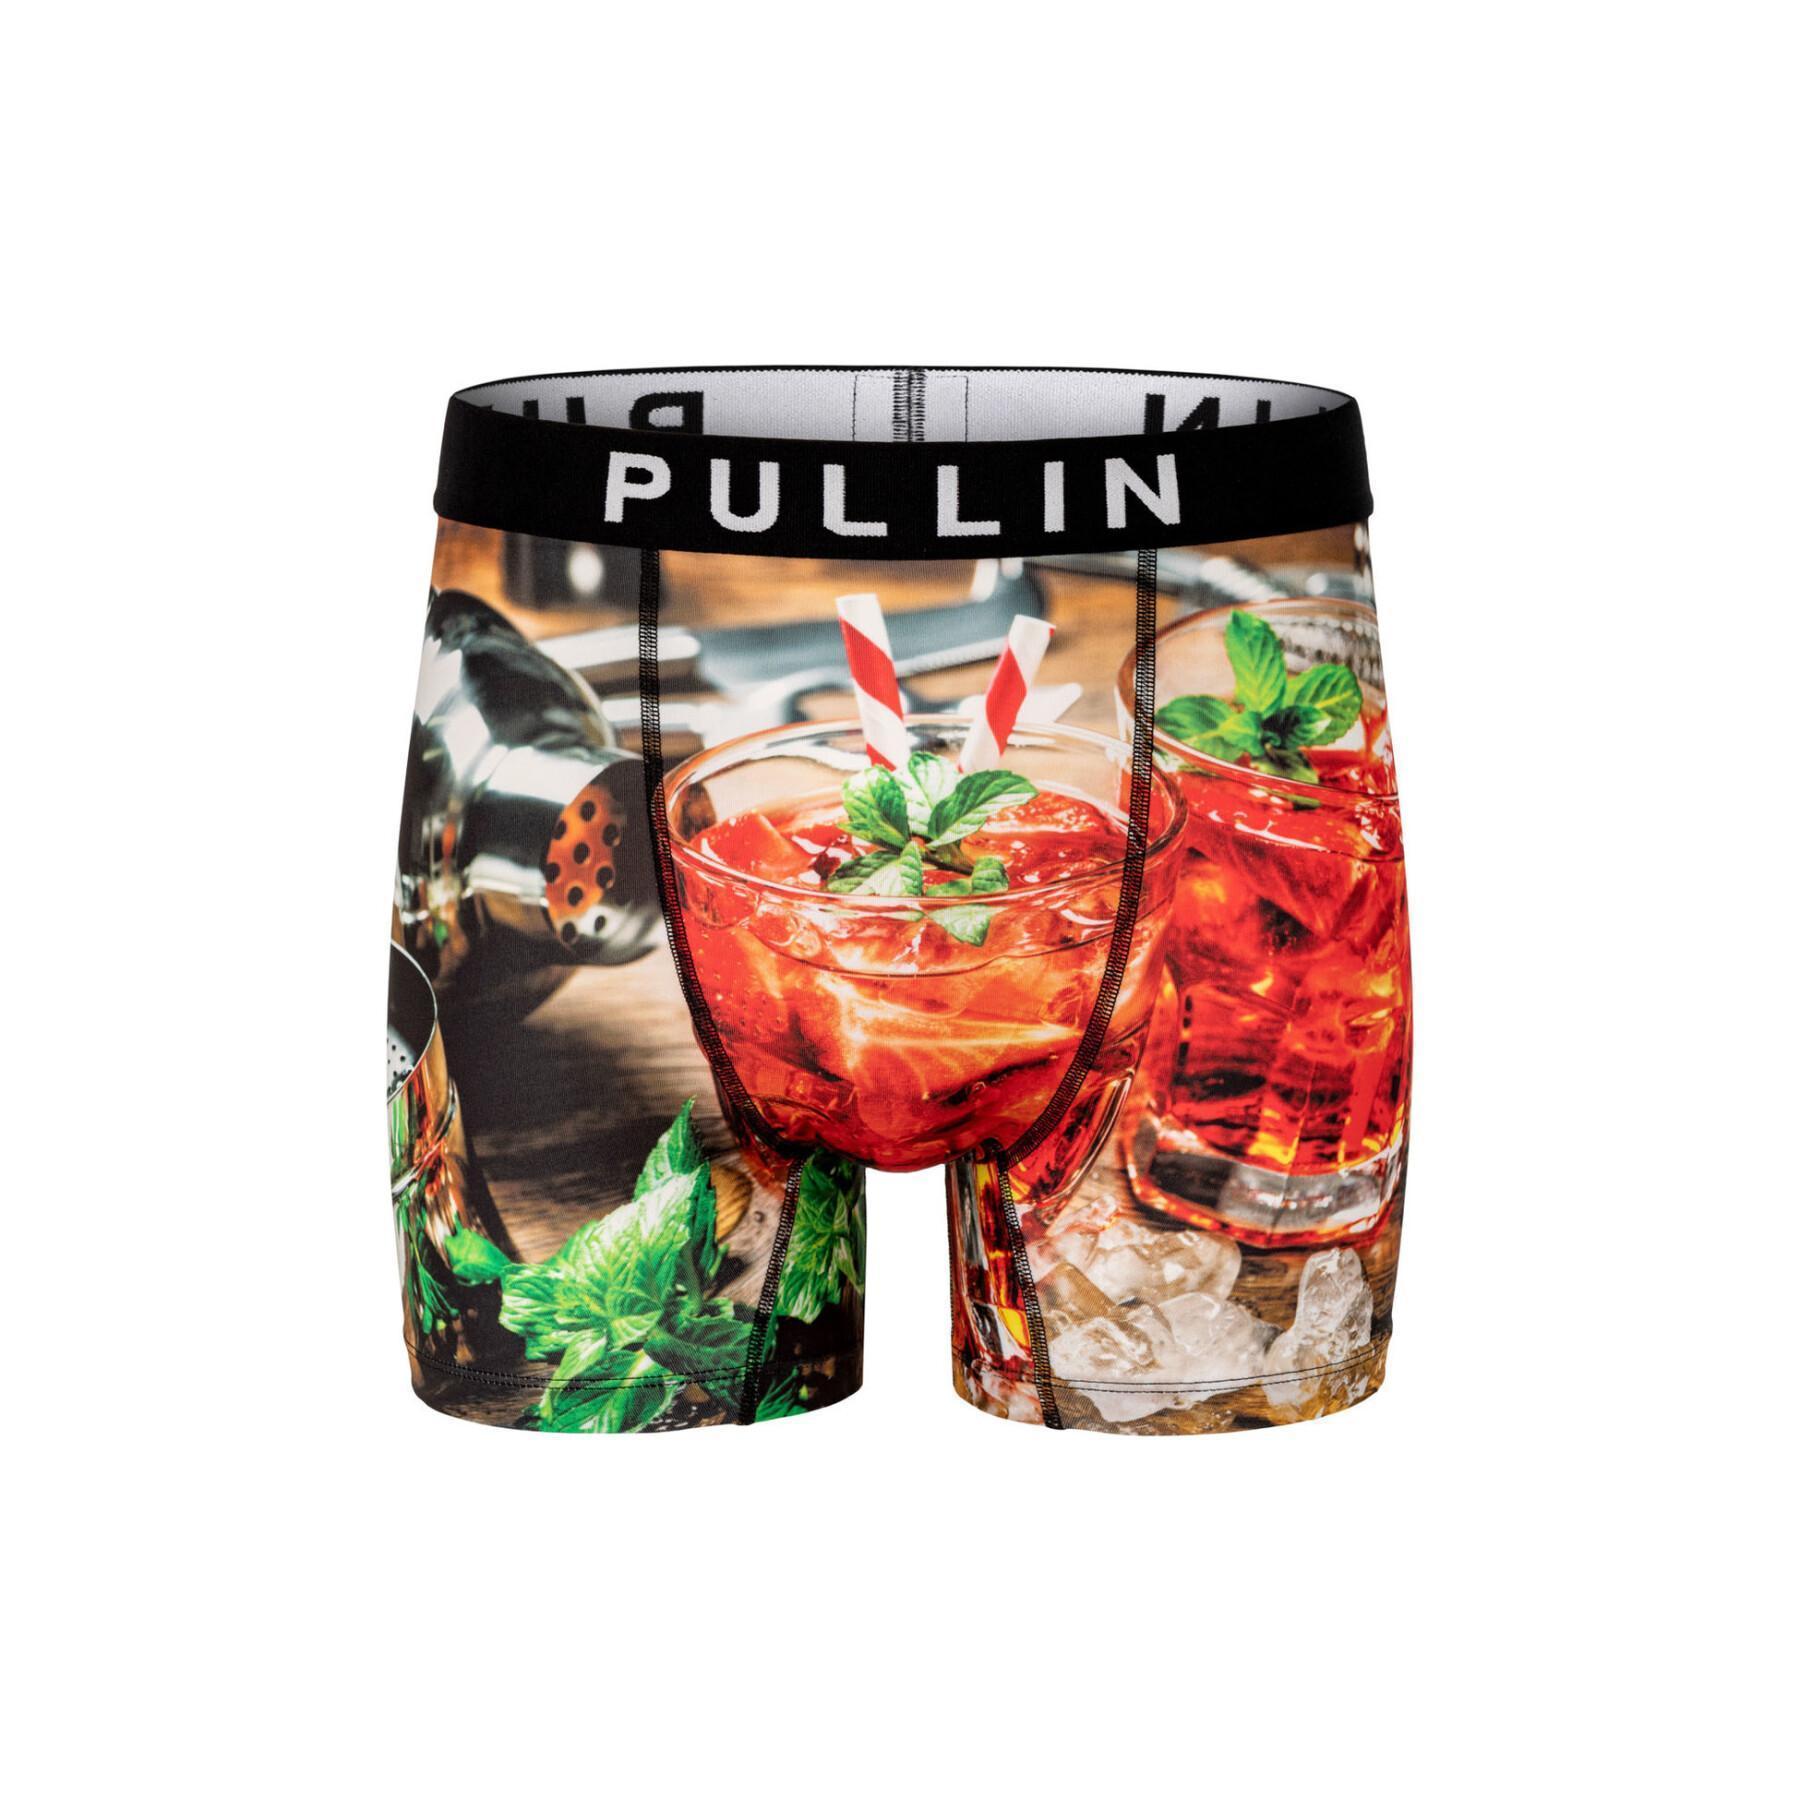 Boxershorts Pull-in fashion 2 fraisito